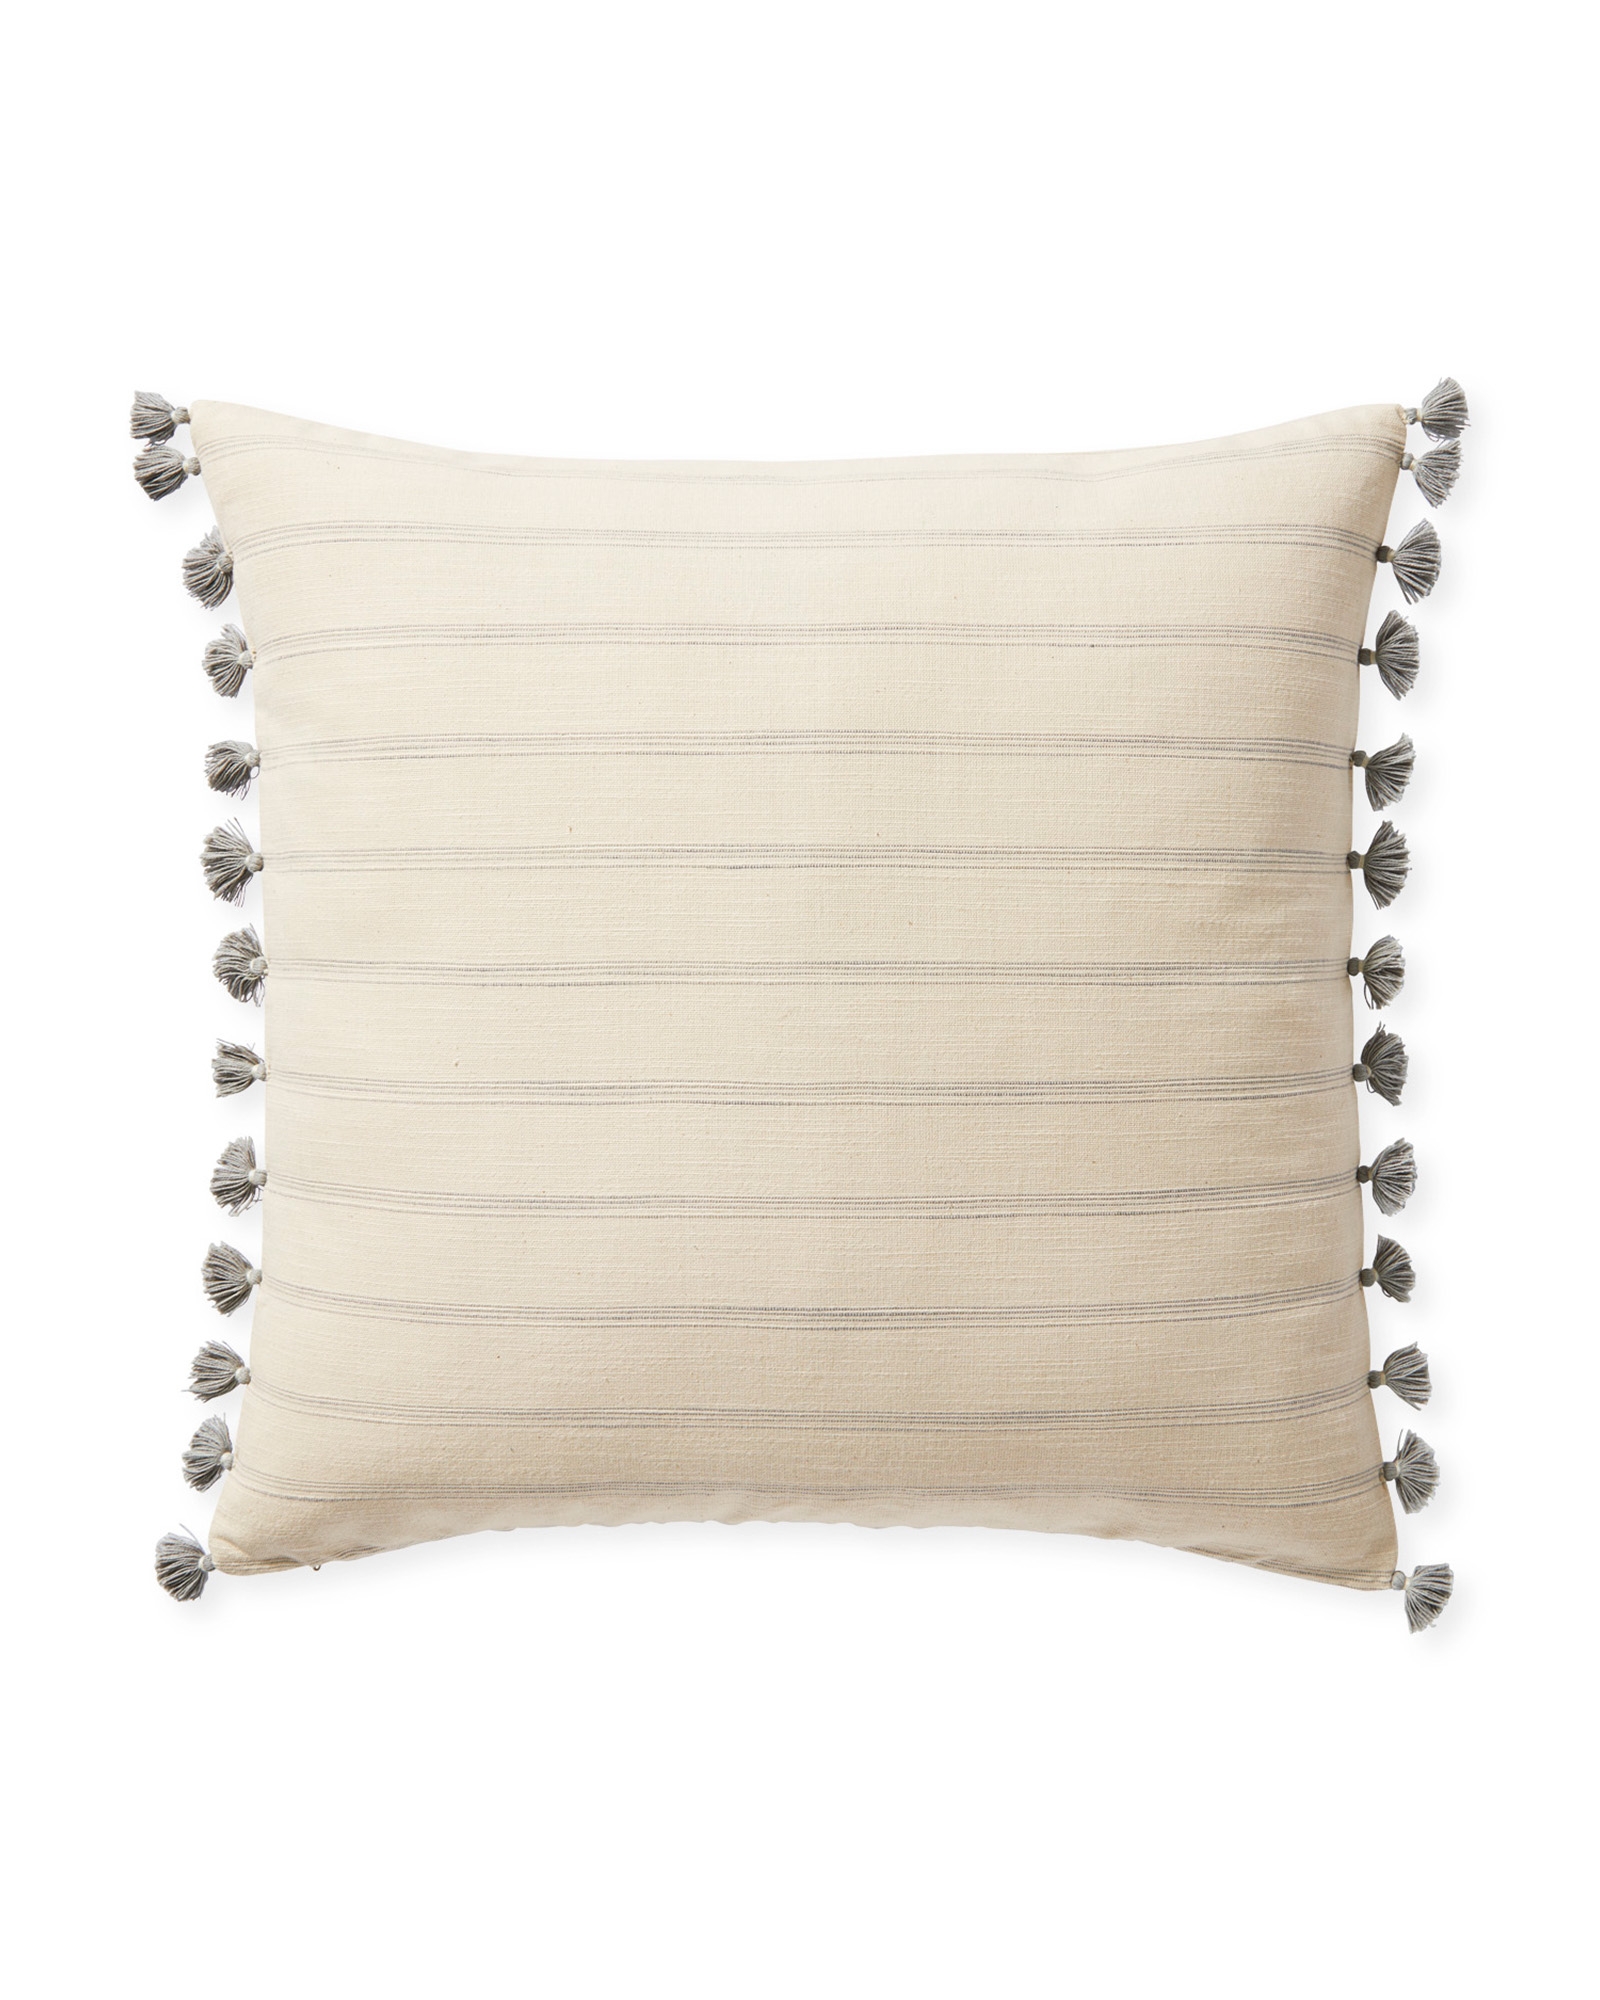 Alsworth 22" SQ Pillow Cover - Fog - Insert sold separately - Image 0